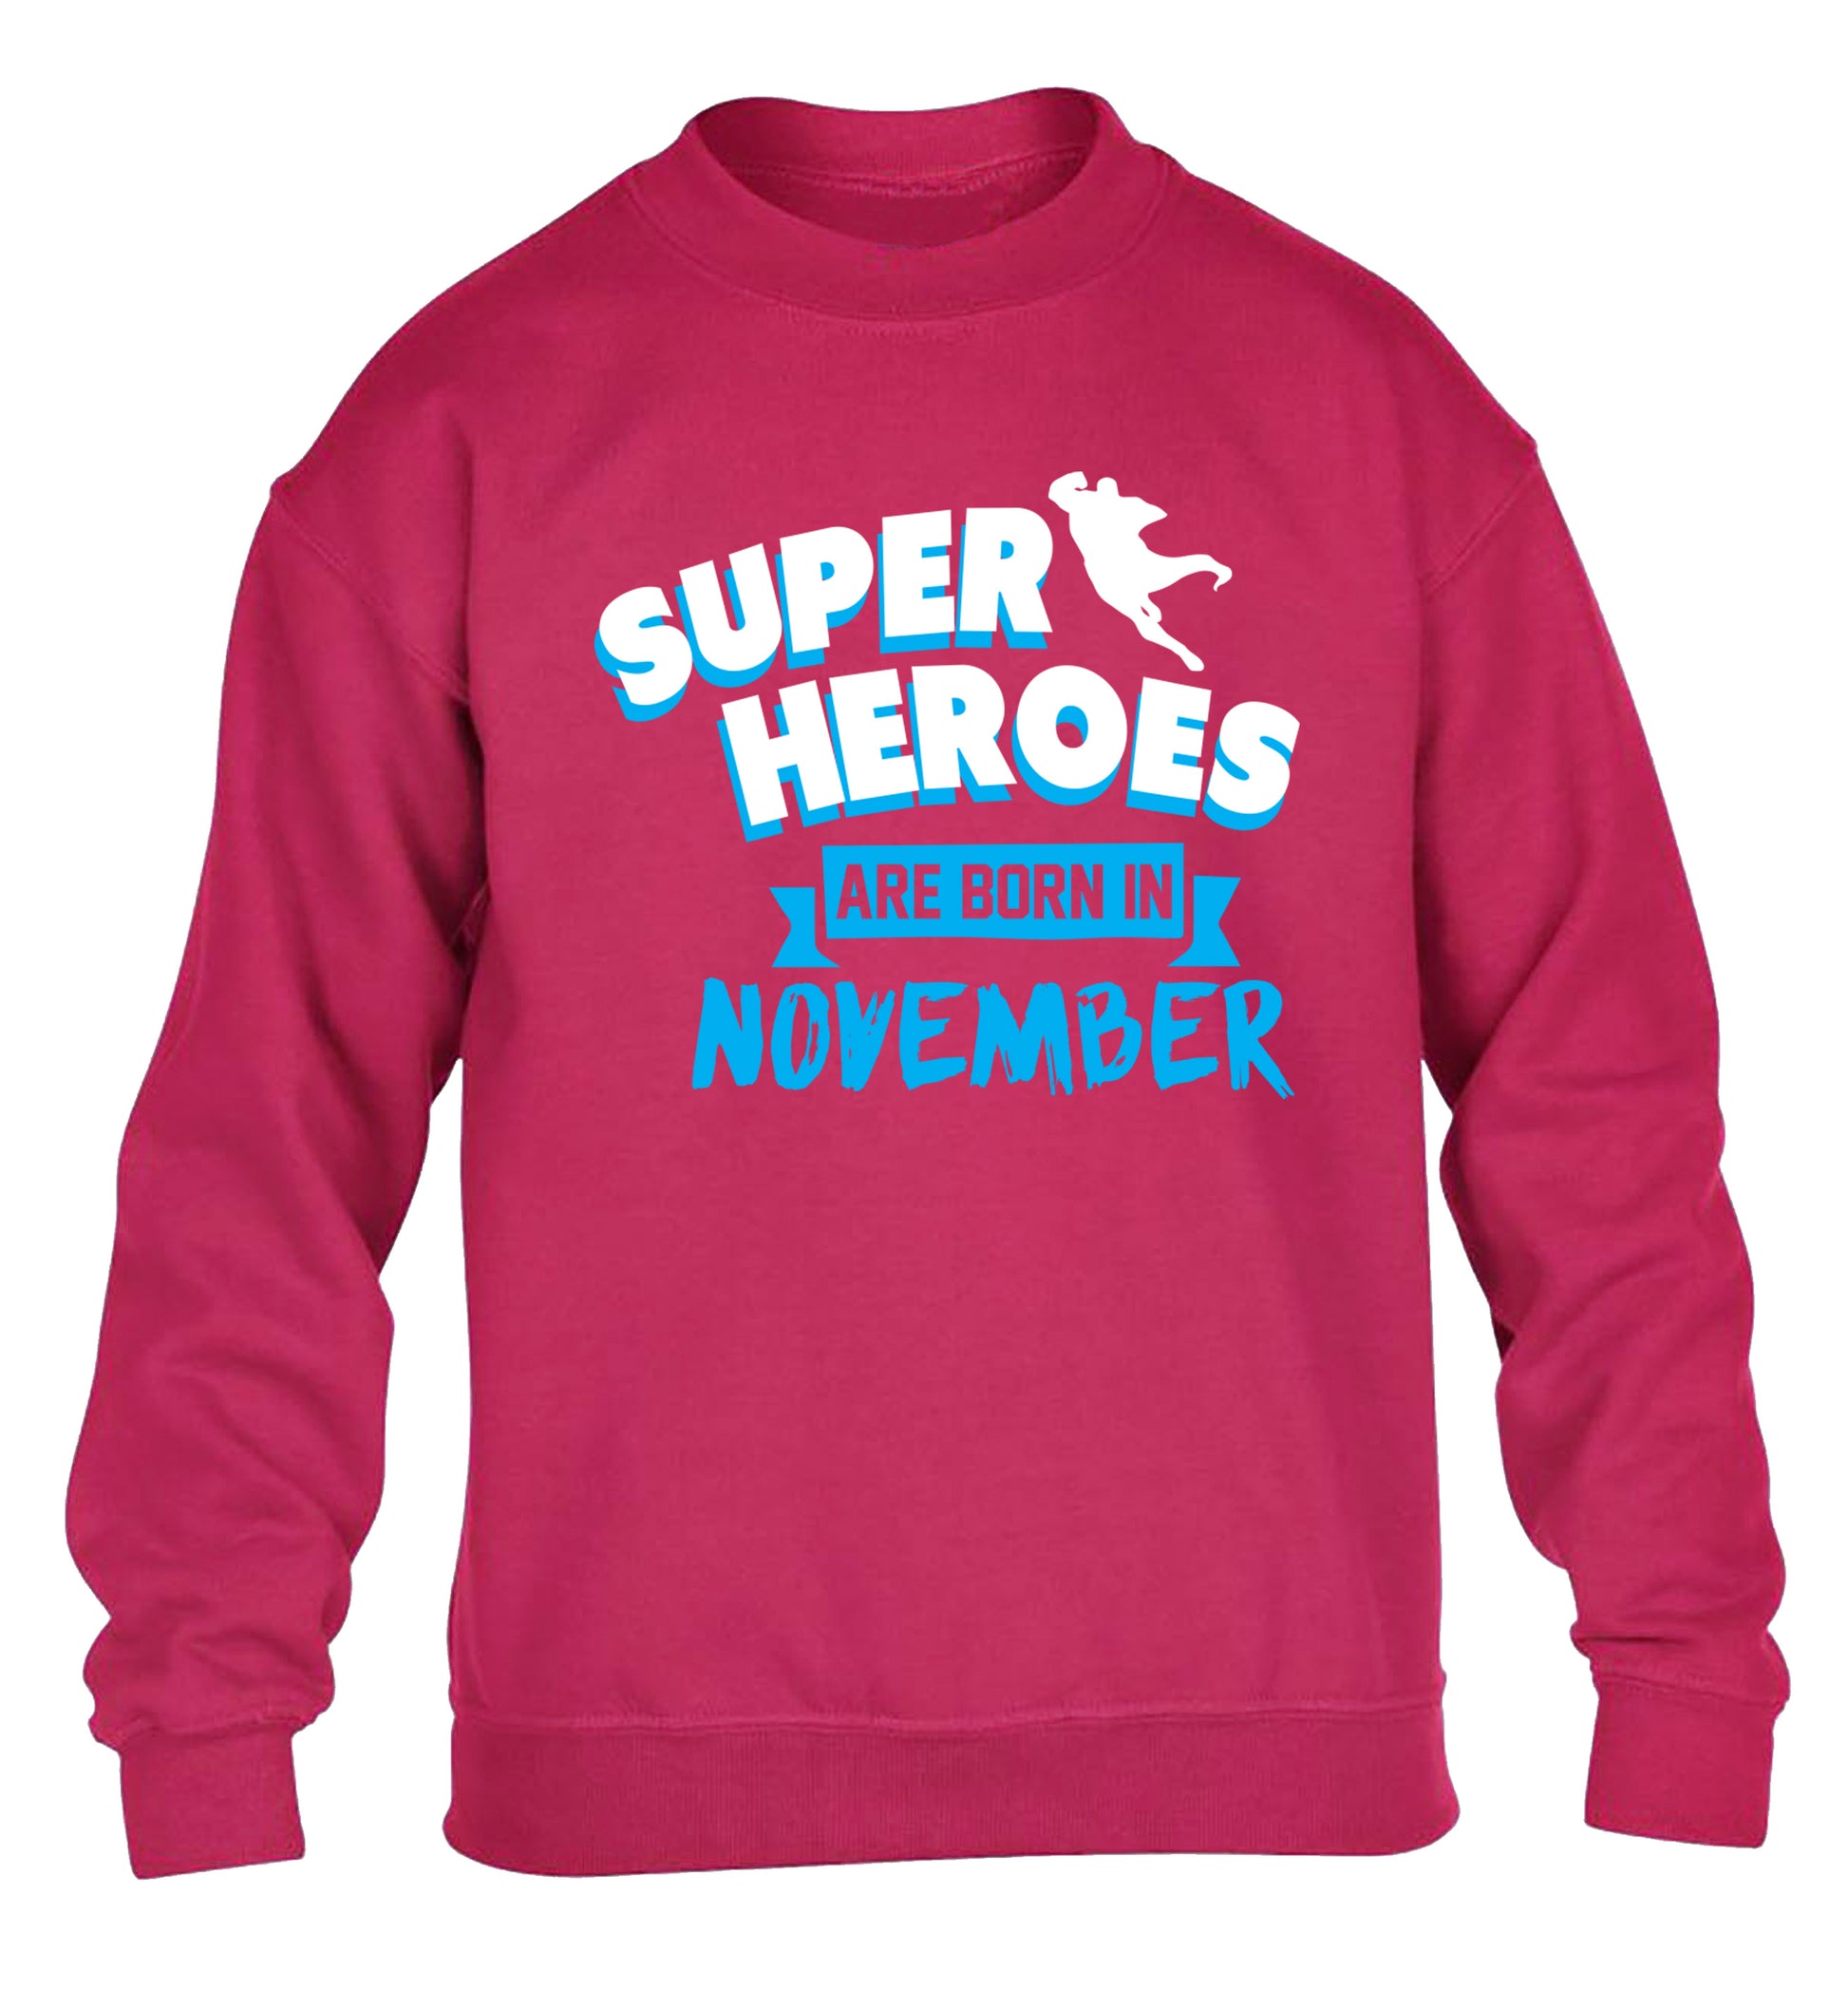 Superheroes are born in November children's pink sweater 12-13 Years